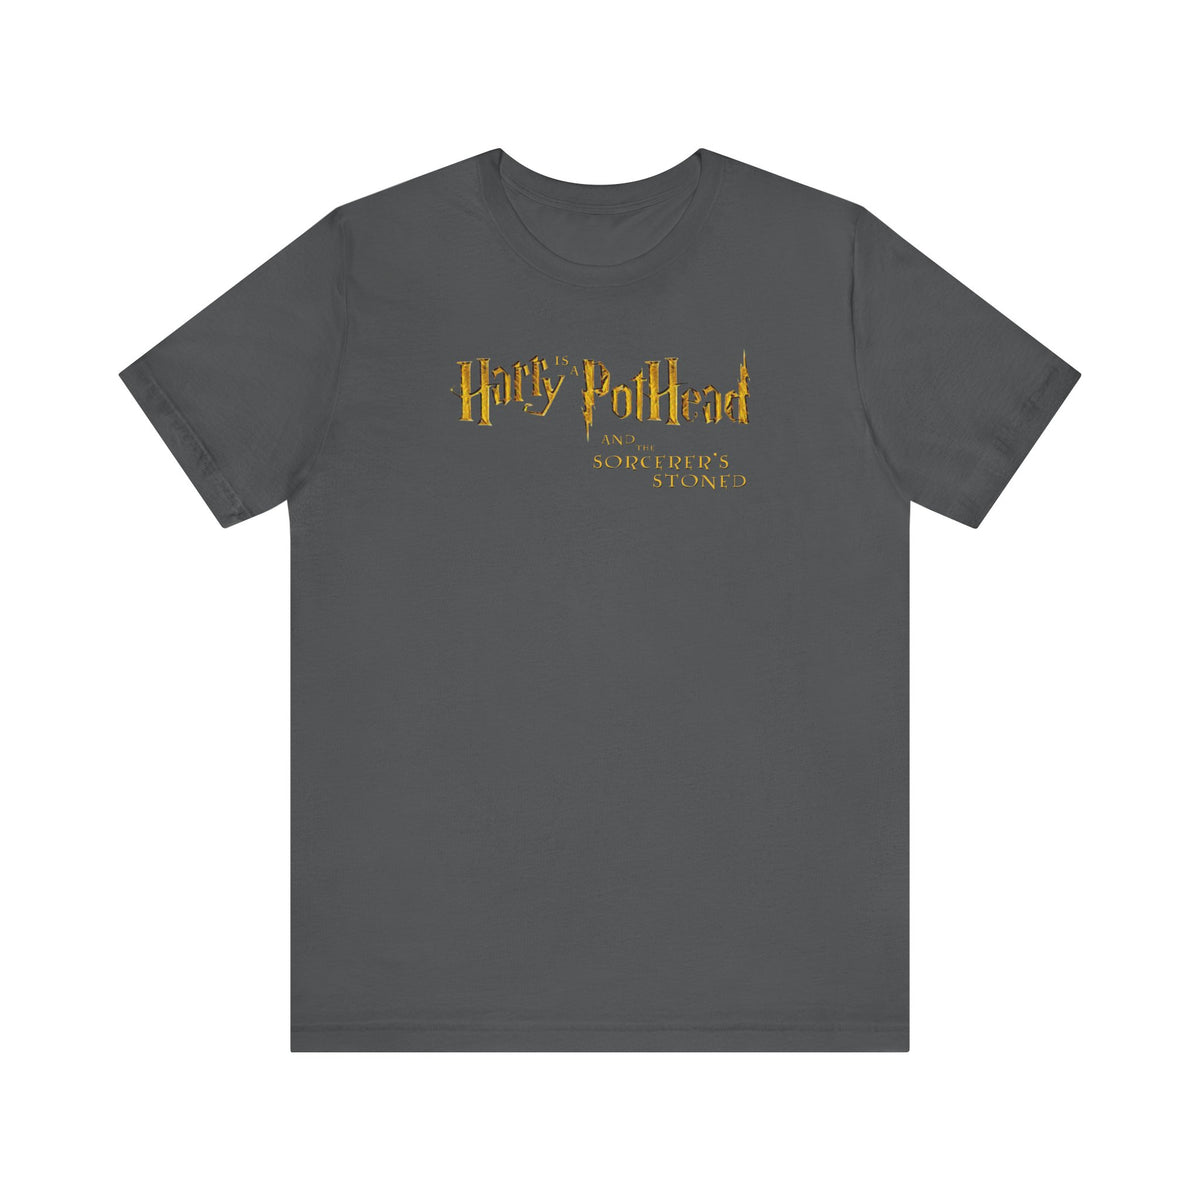 Harry Is A Pothead And The Sorcerer's Stoned - Men's T-Shirt